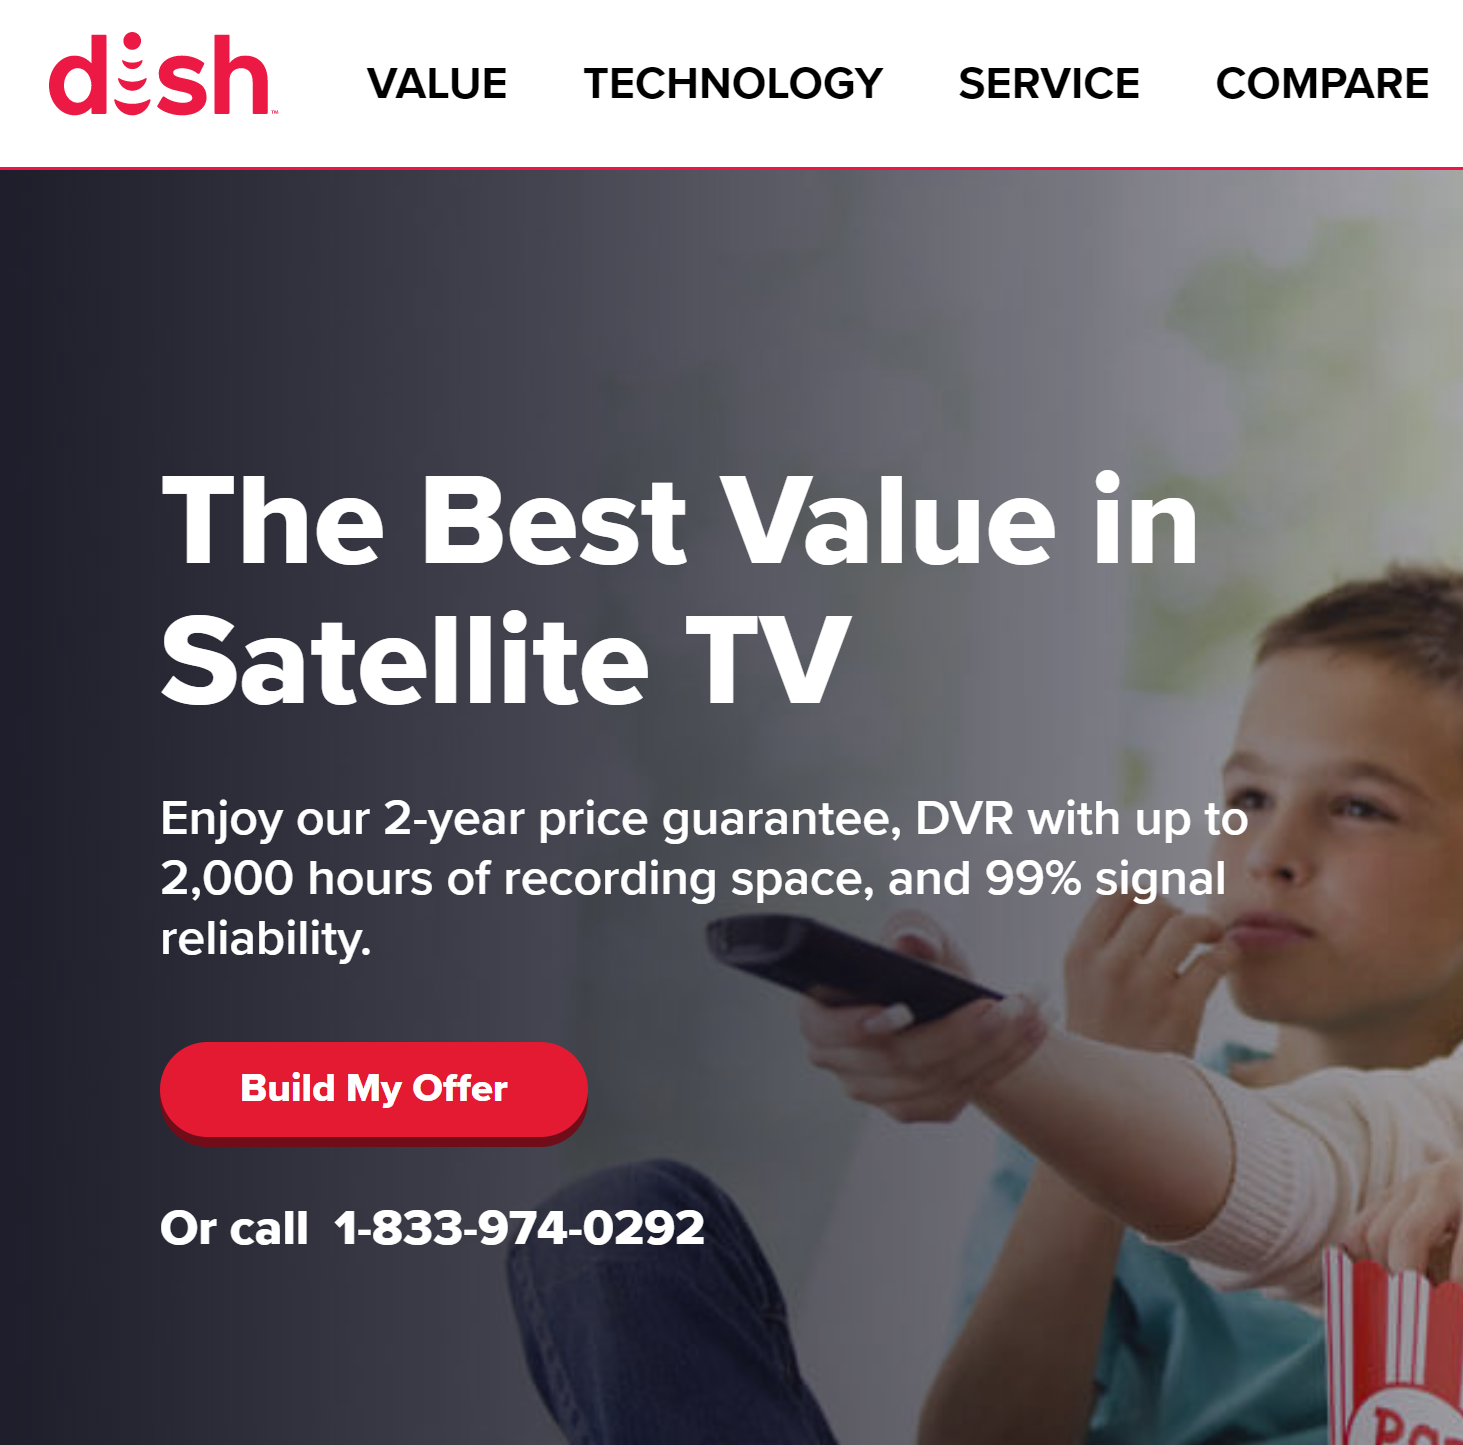 Upgrade your Cable TV to Dish Network